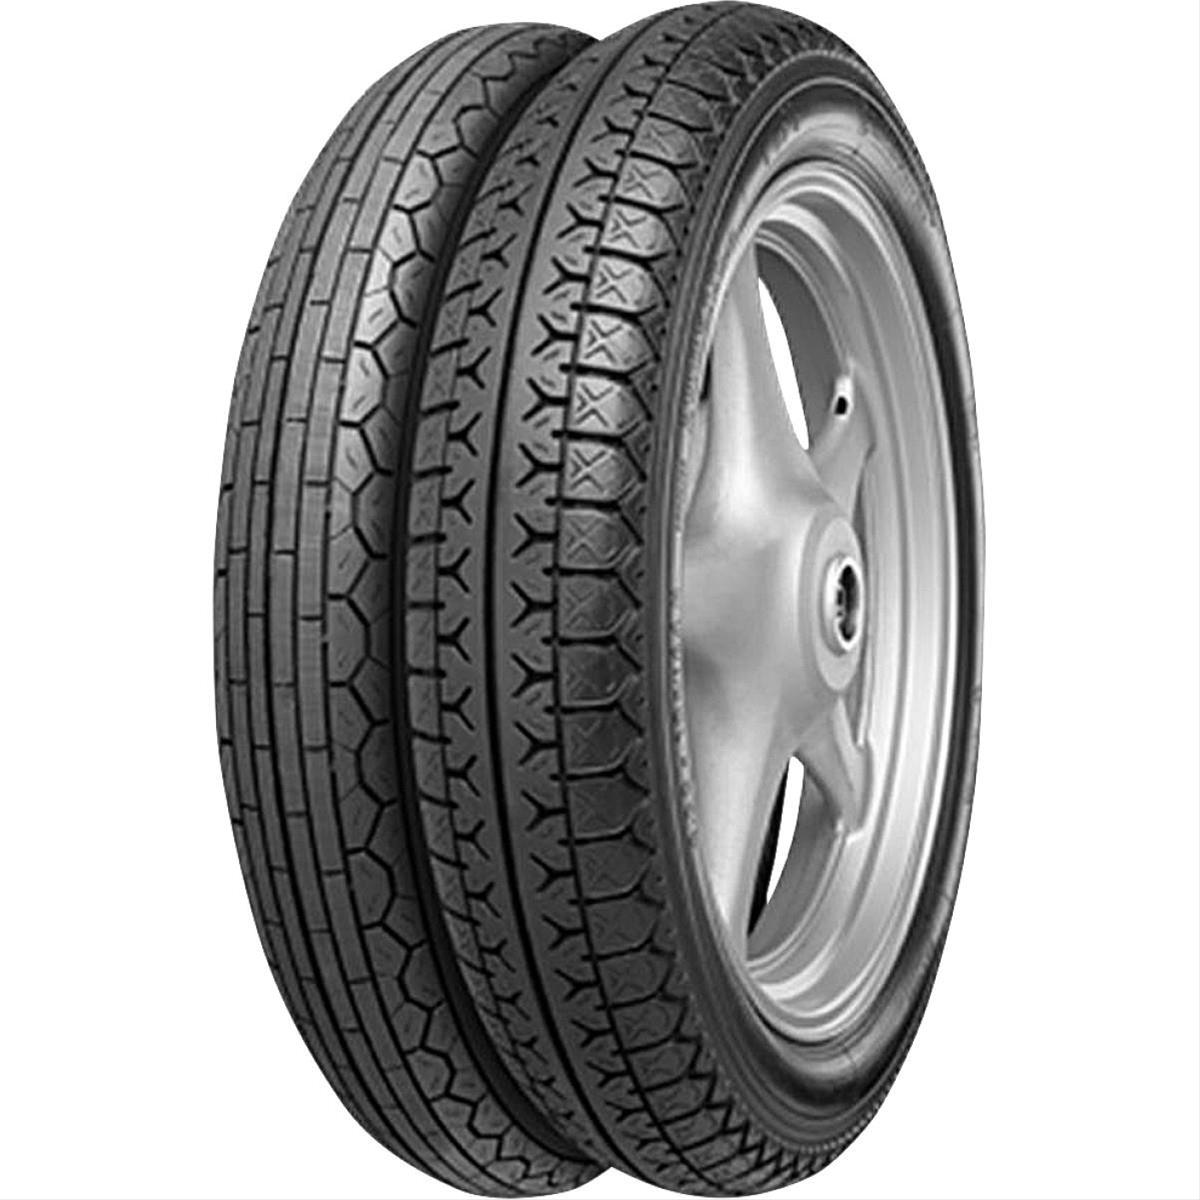 Continental Motorcycle Tires 02481150000 Continental Tire